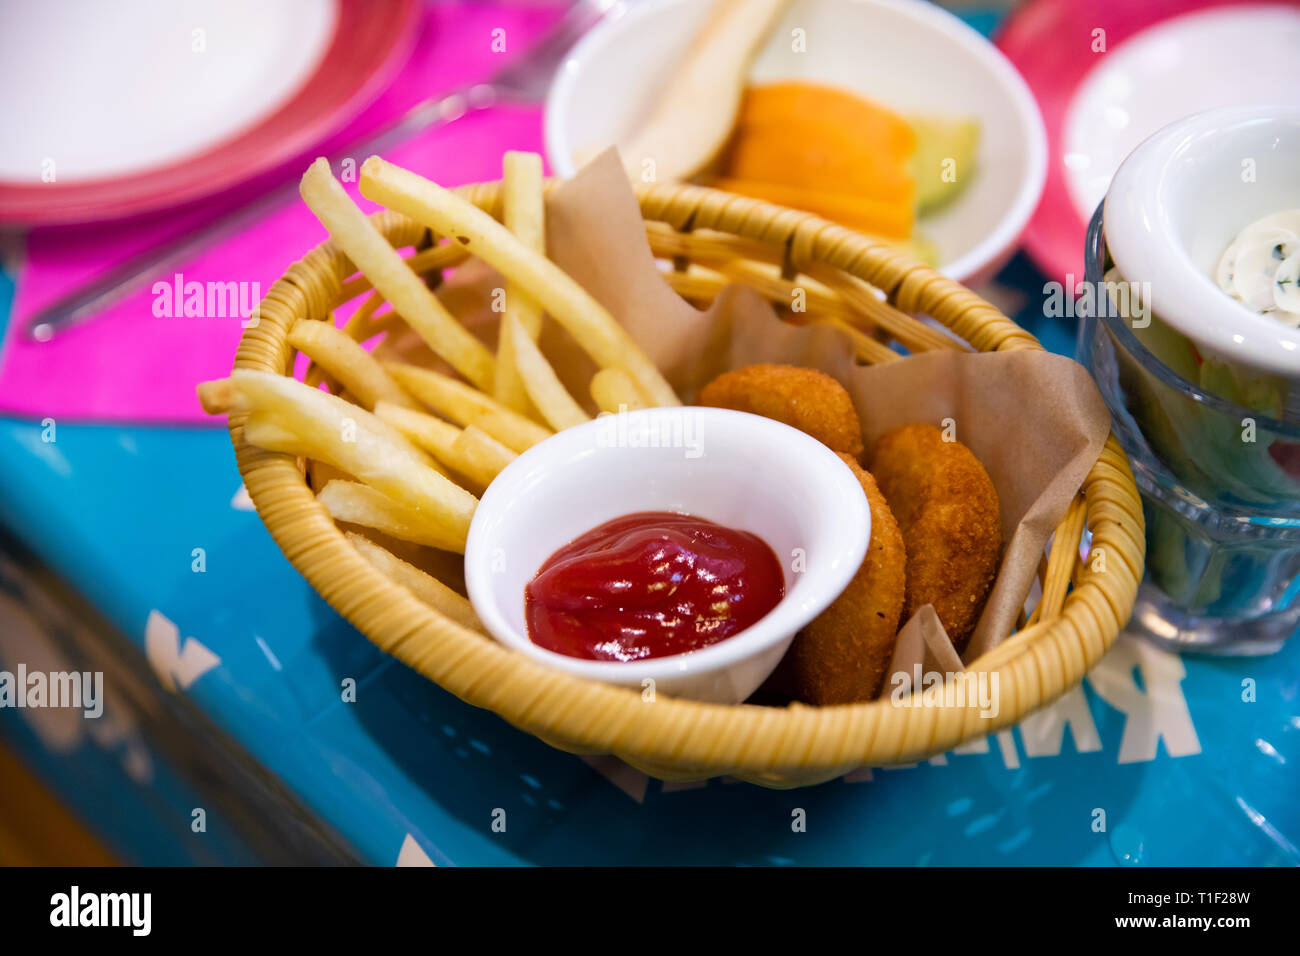 Fries and ketchup on the table Stock Photo